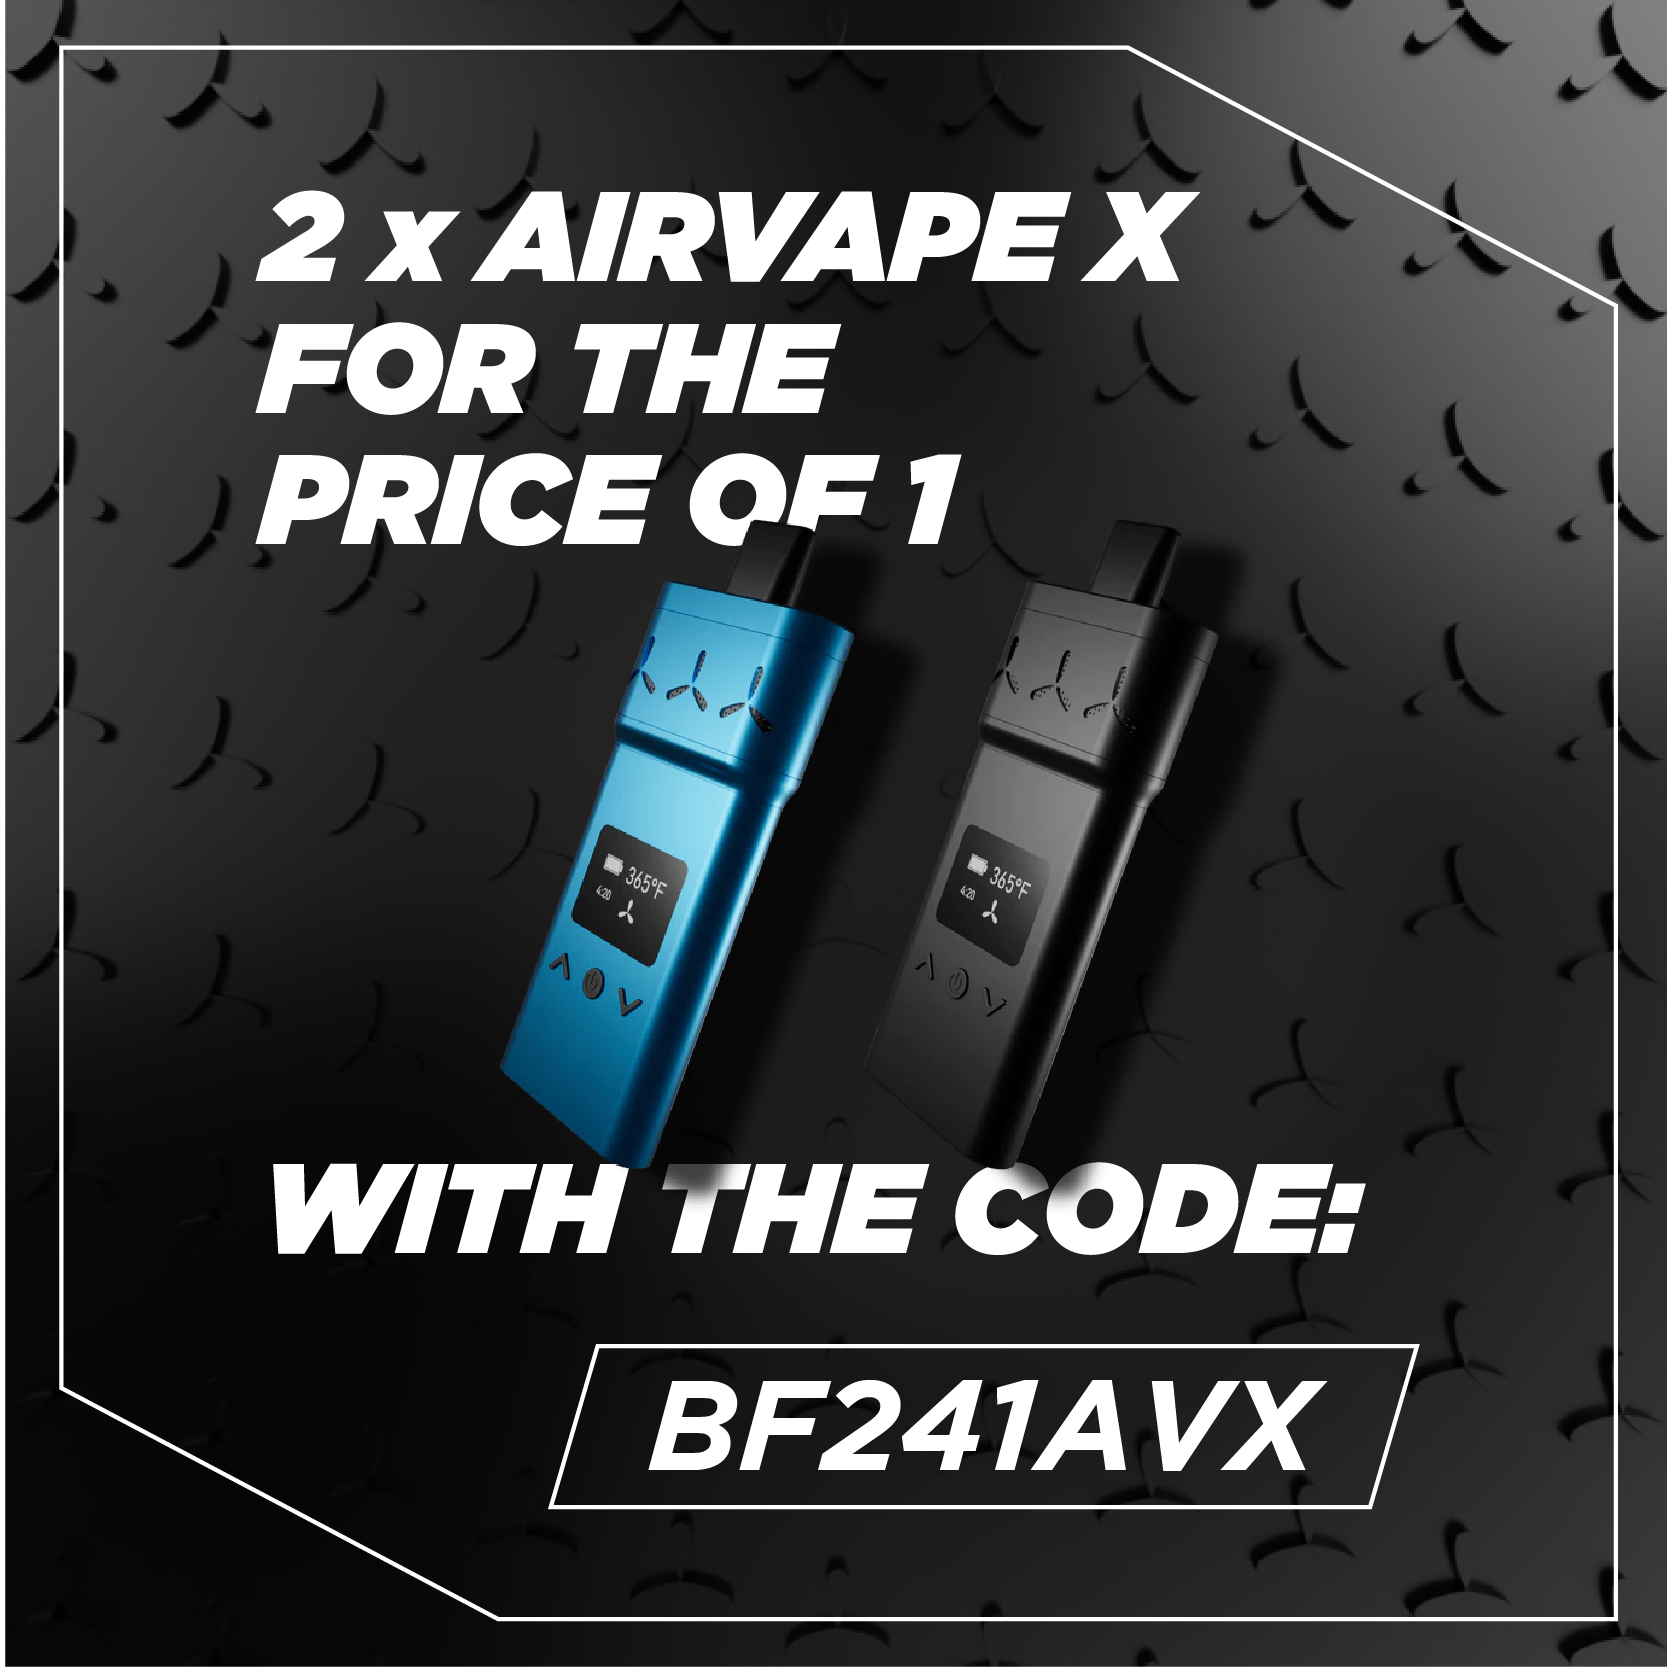 Get 2 Airvape X units for the price of one with the code BF241AVX